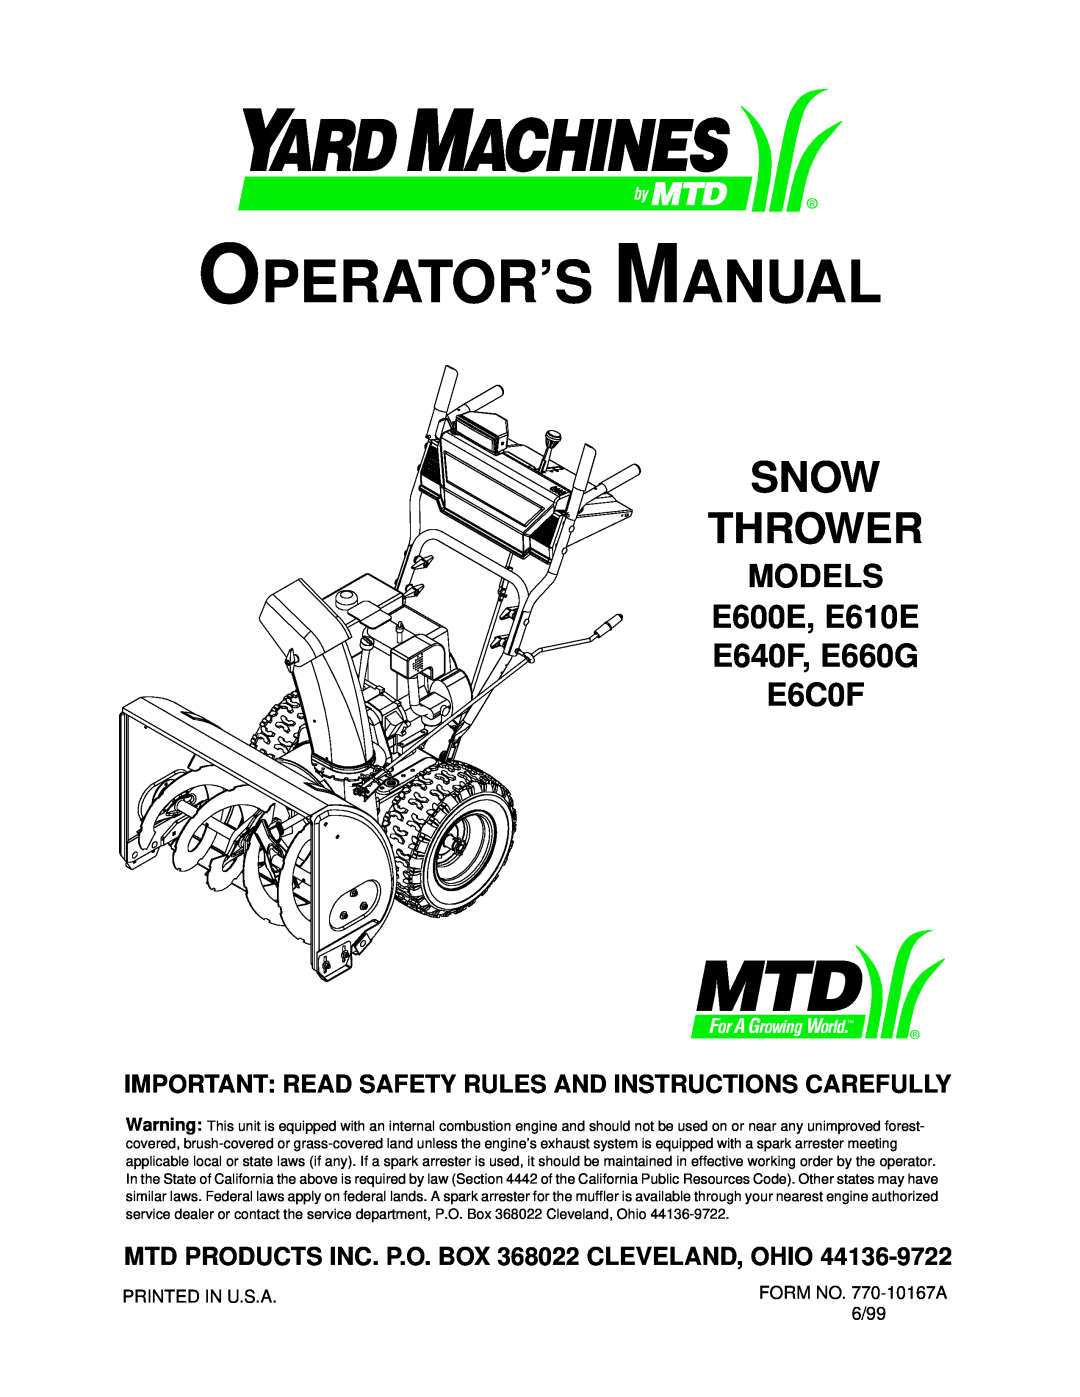 Yard Machines E610E, E6C0F manual Snow Thrower, Important Read Safety Rules And Instructions Carefully, Operator’S Manual 